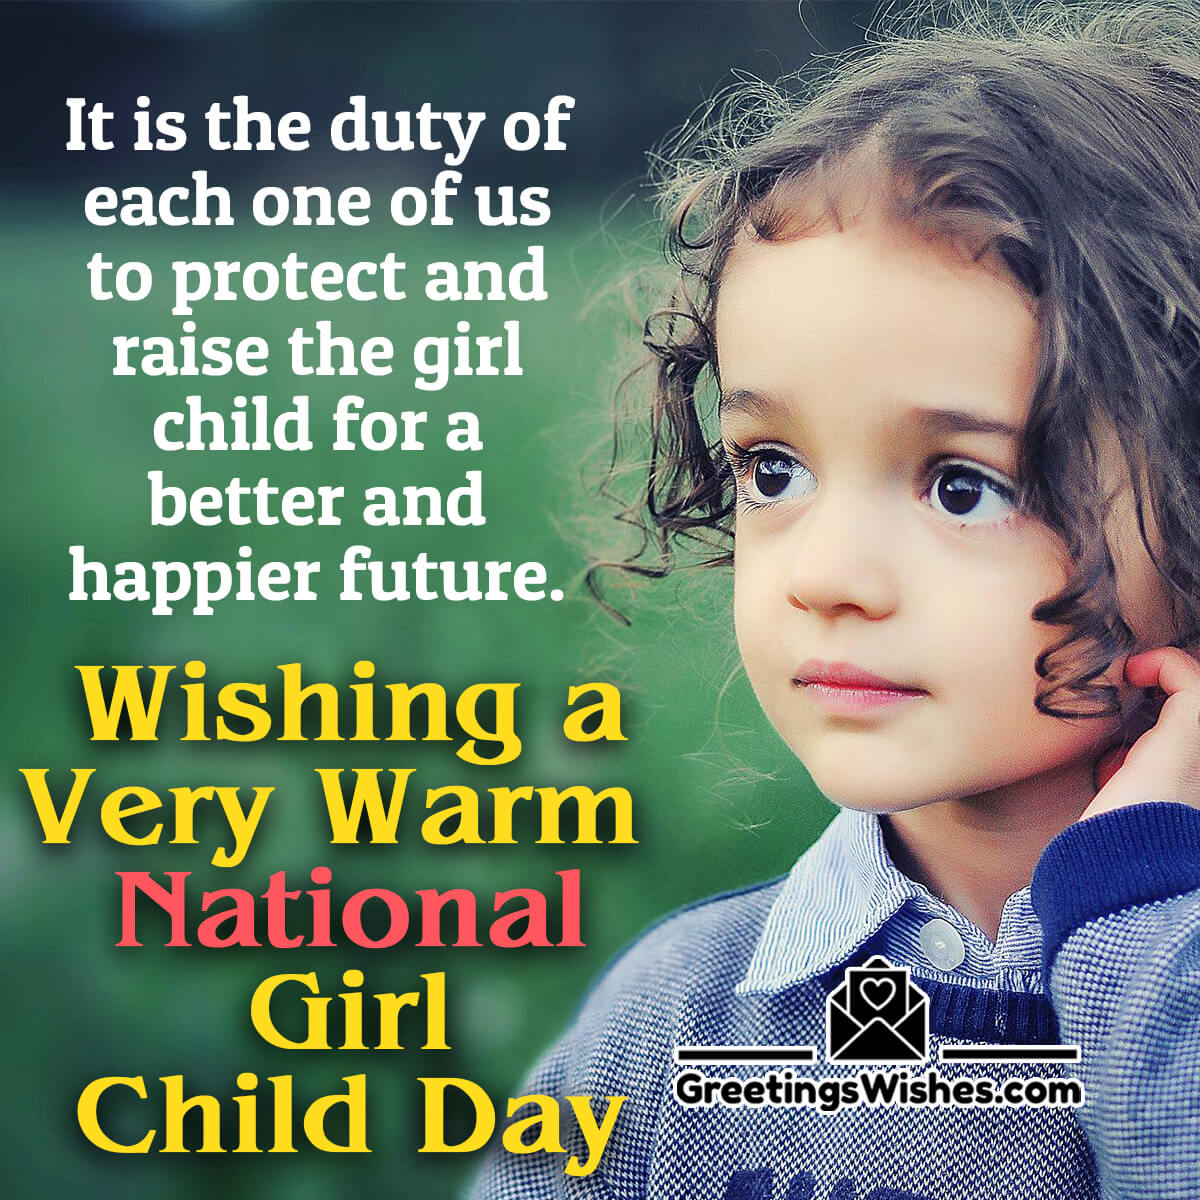 Wishing A Very Warm National Girl Child Day.